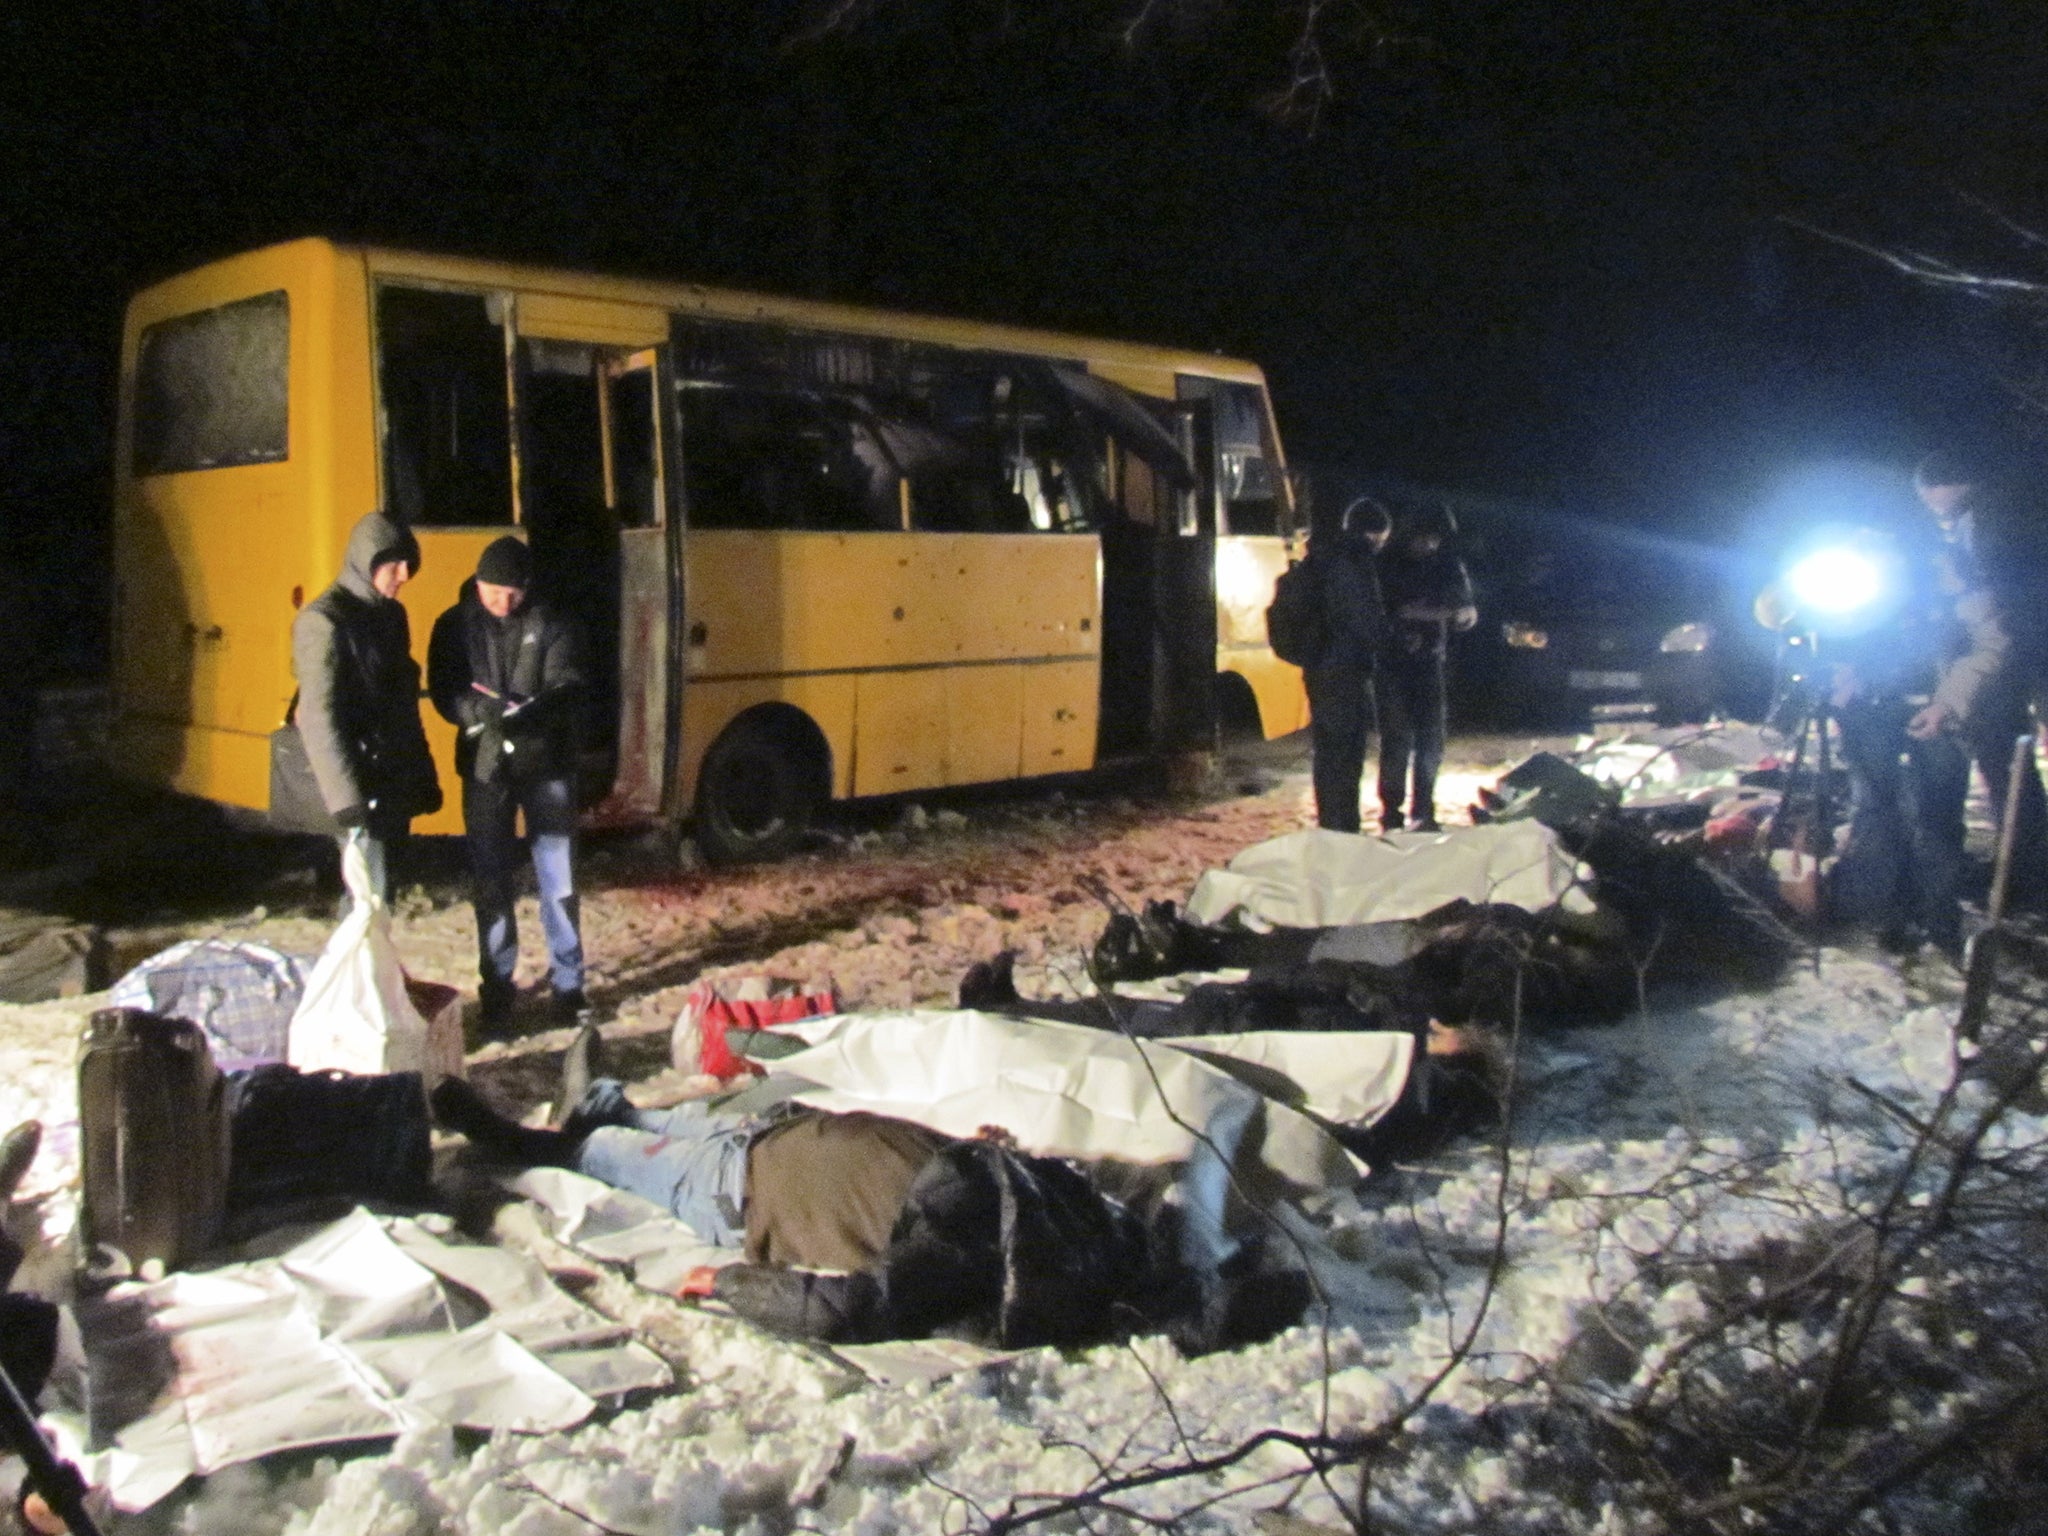 The bodies of the victims of a shelling attack on a bus near the Ukraine town of Volnovakha
on Tuesday are laid out by the side of the Donetsk-Mariupol road